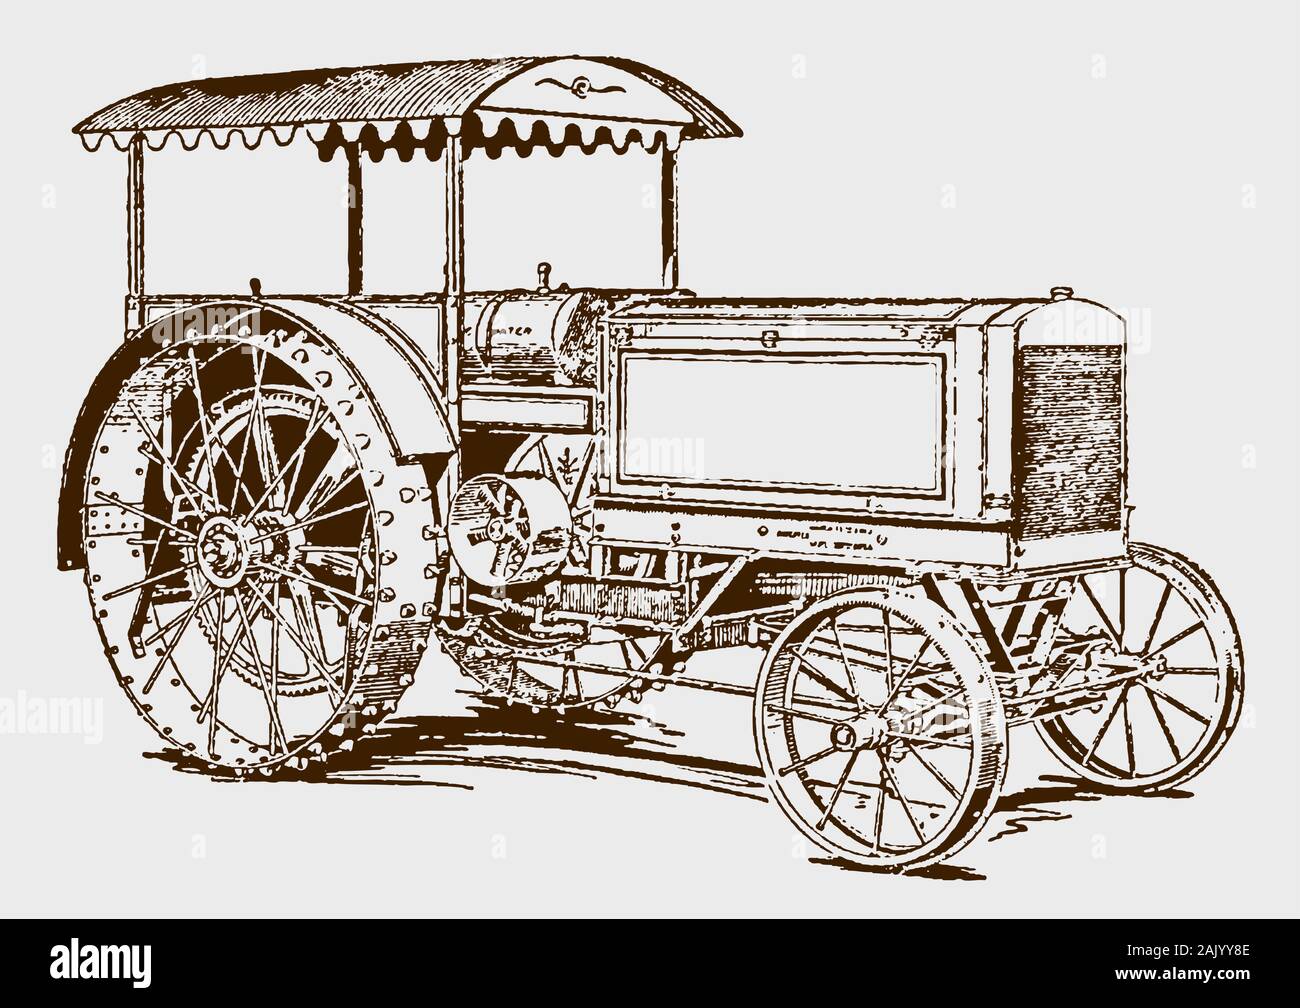 Historical gasoline or kerosene tractor. Illustration after an engraving from the early 20th century Stock Vector